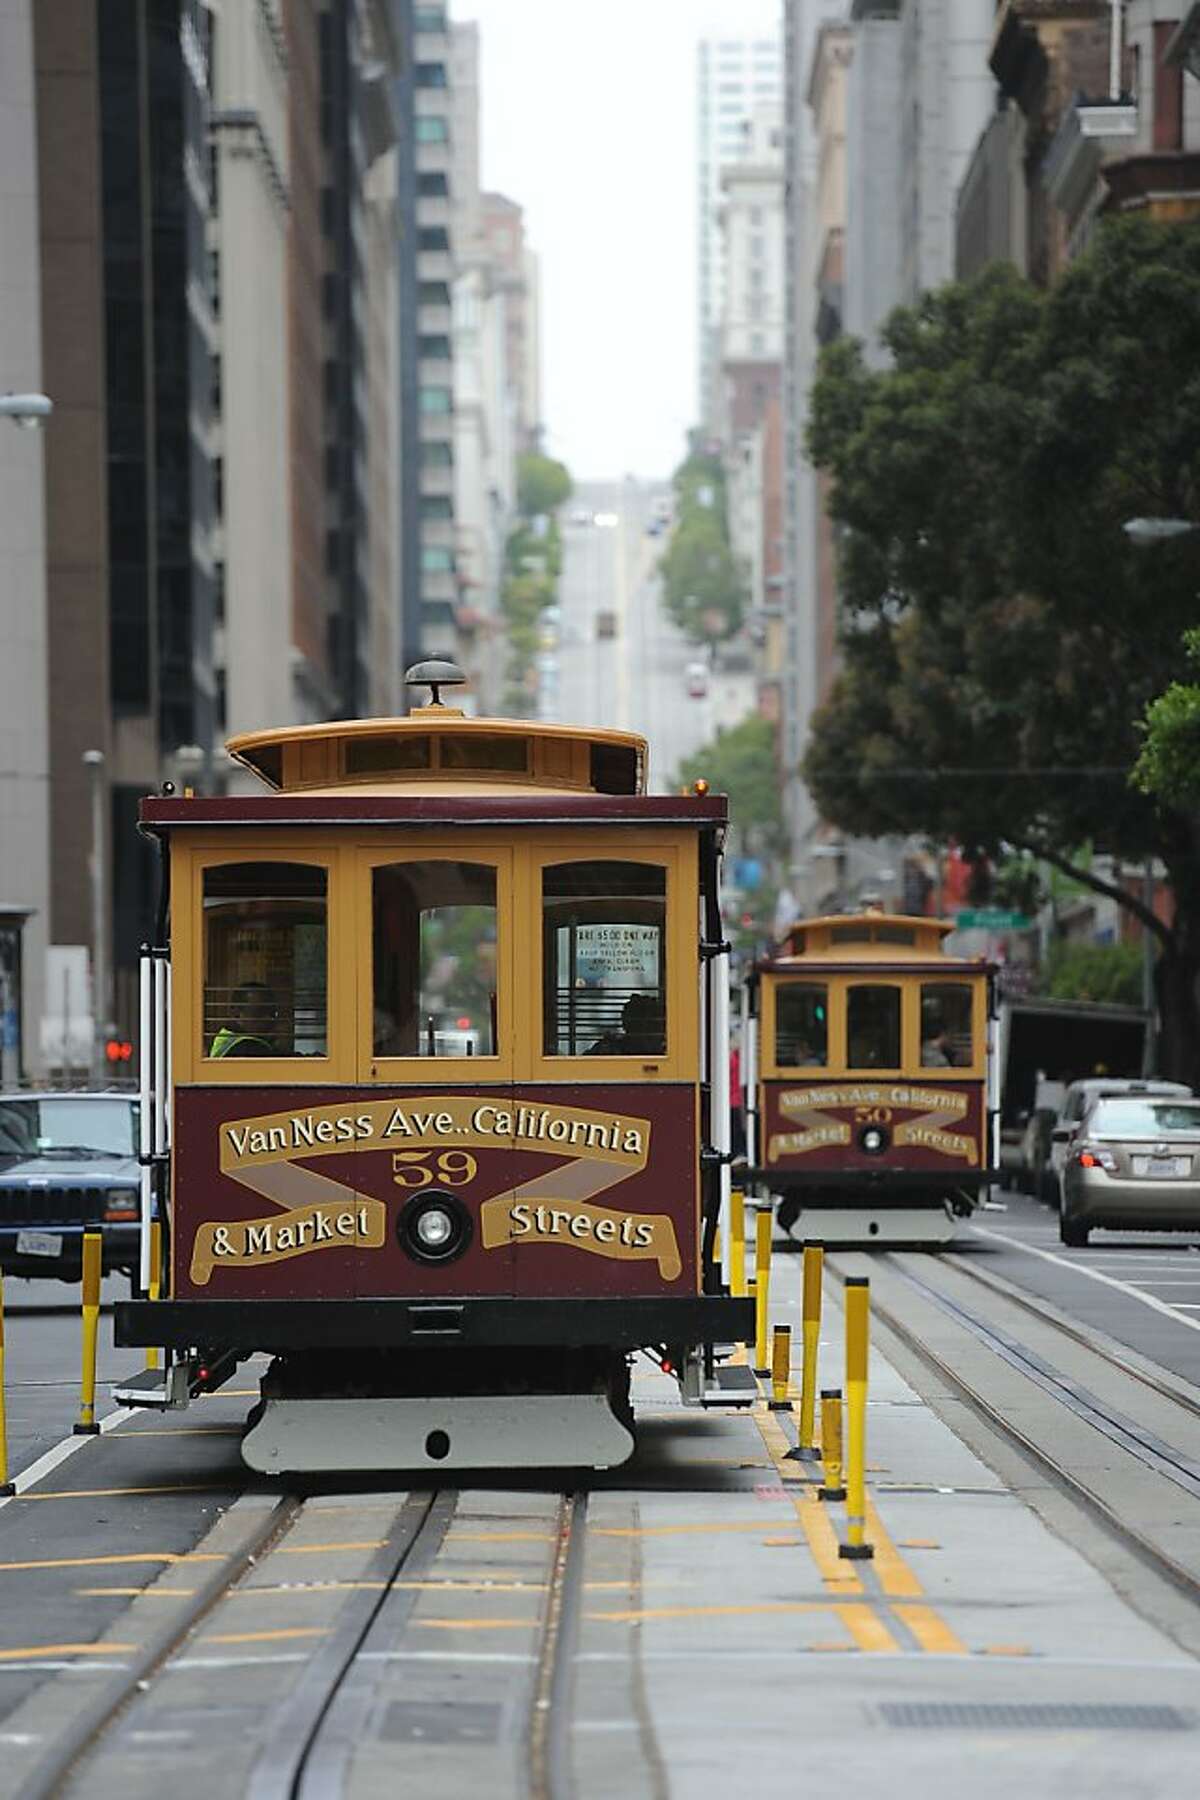 California St. cable cars are seen in San Francisco on June 27, 2011. The city held a ribbon cutting ceremony to welcome back the line after being closed due to repairs since December.